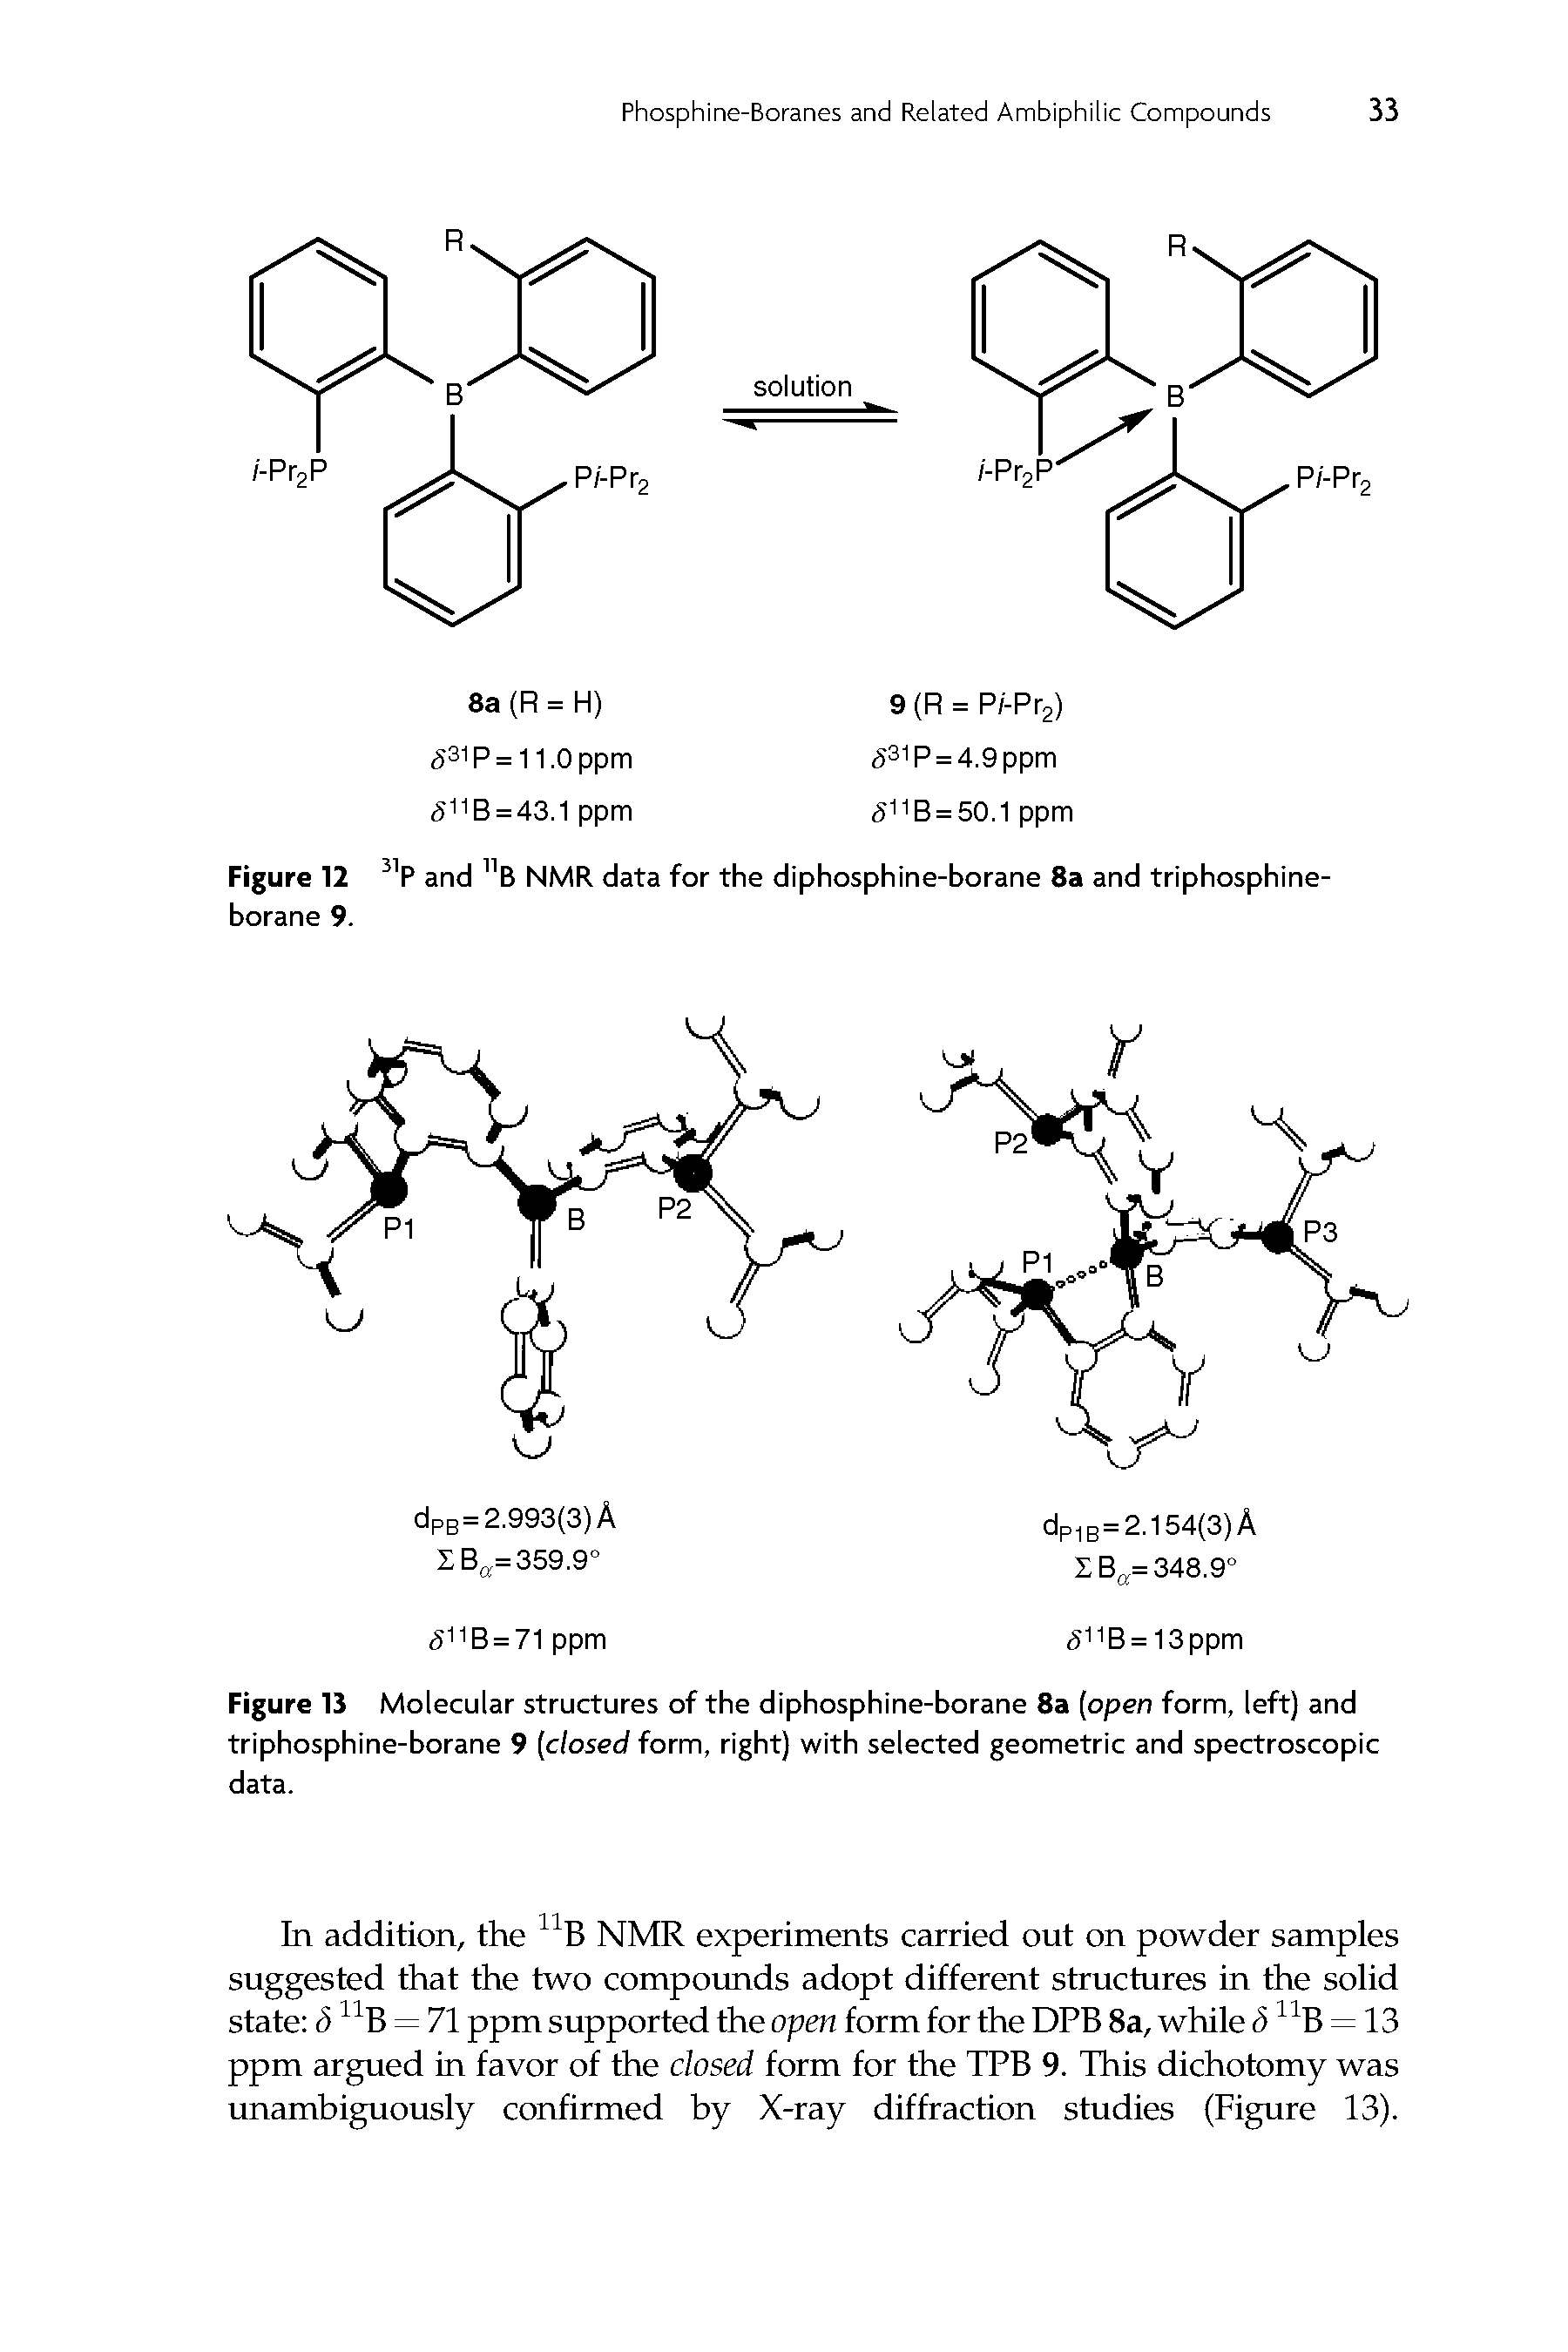 Figure 13 Molecular structures of the diphosphine-borane 8a (open form, left) and triphosphine-borane 9 (closed form, right) with selected geometric and spectroscopic data.